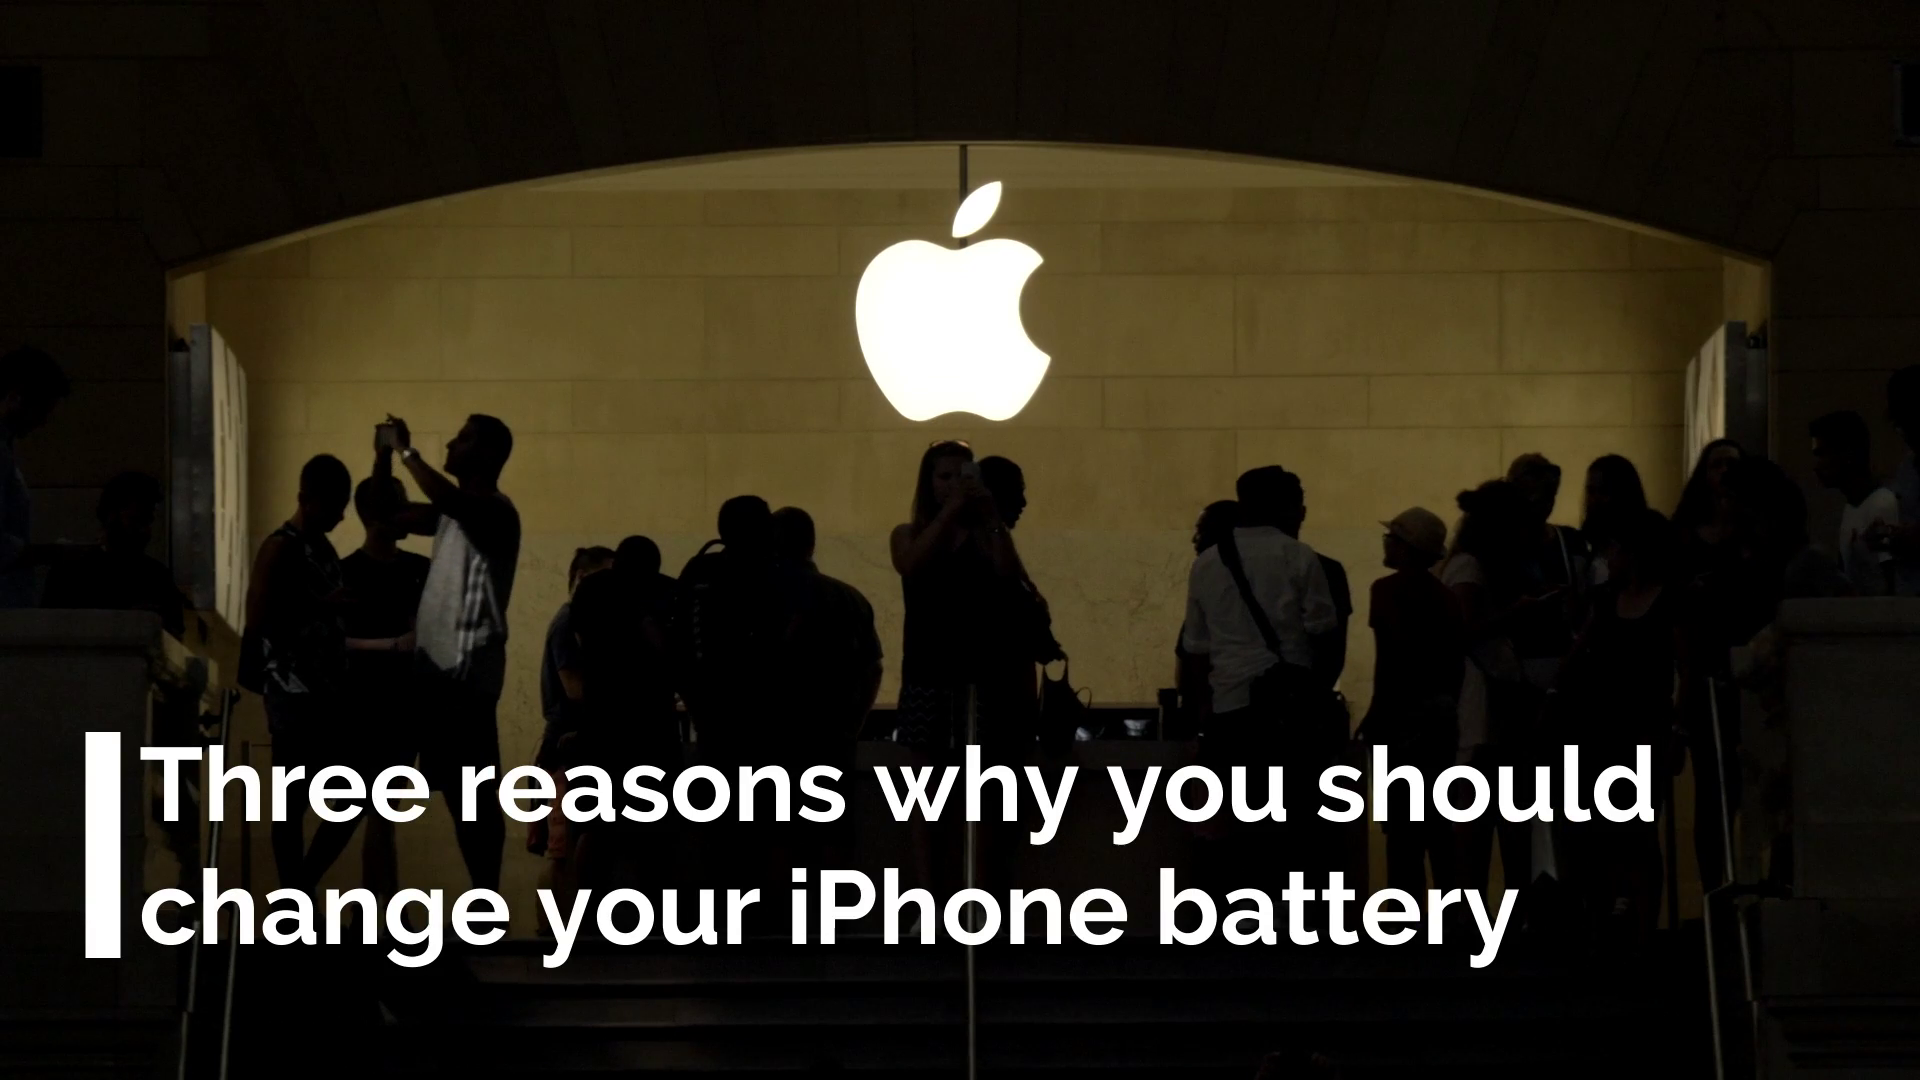 Three reasons why you should change your iPhone battery